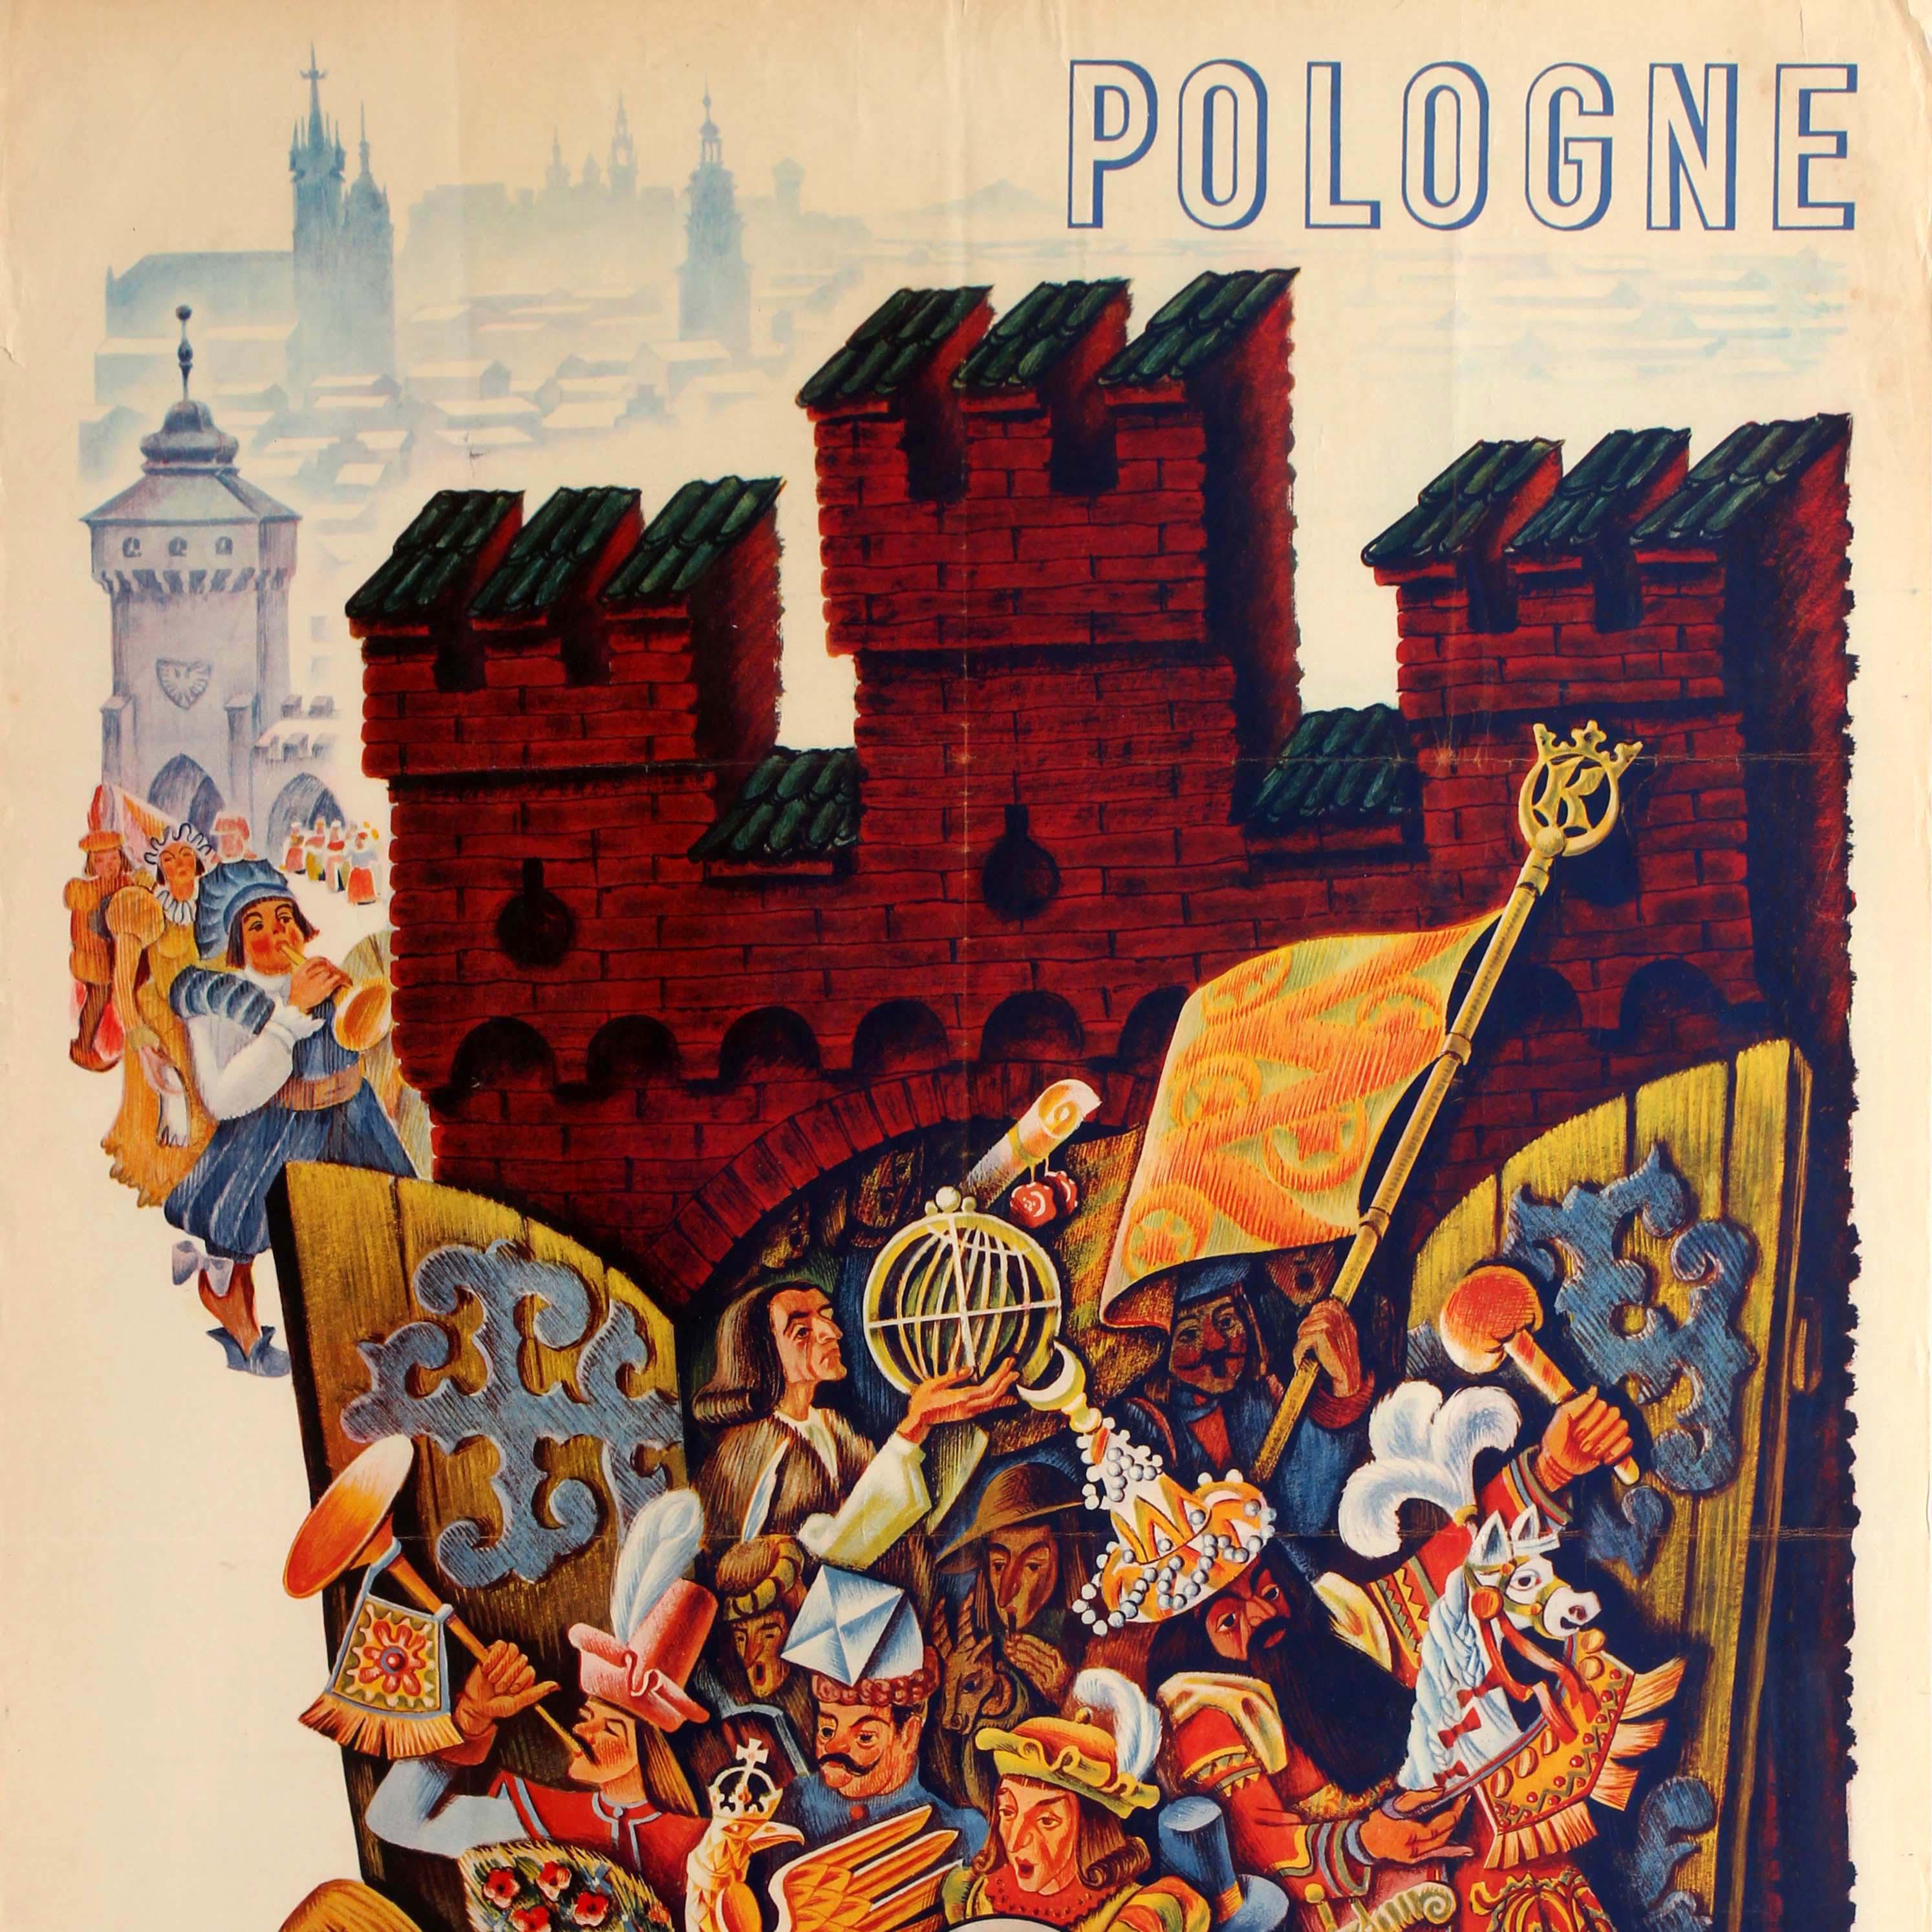 Original vintage Polish State Railways train travel poster advertising the Krakow Festival in Poland / Pologne Fetes de Cracovie on 3-24 June 1939 featuring a colourful design depicting ladies wearing traditional dresses and men in folk tunics and